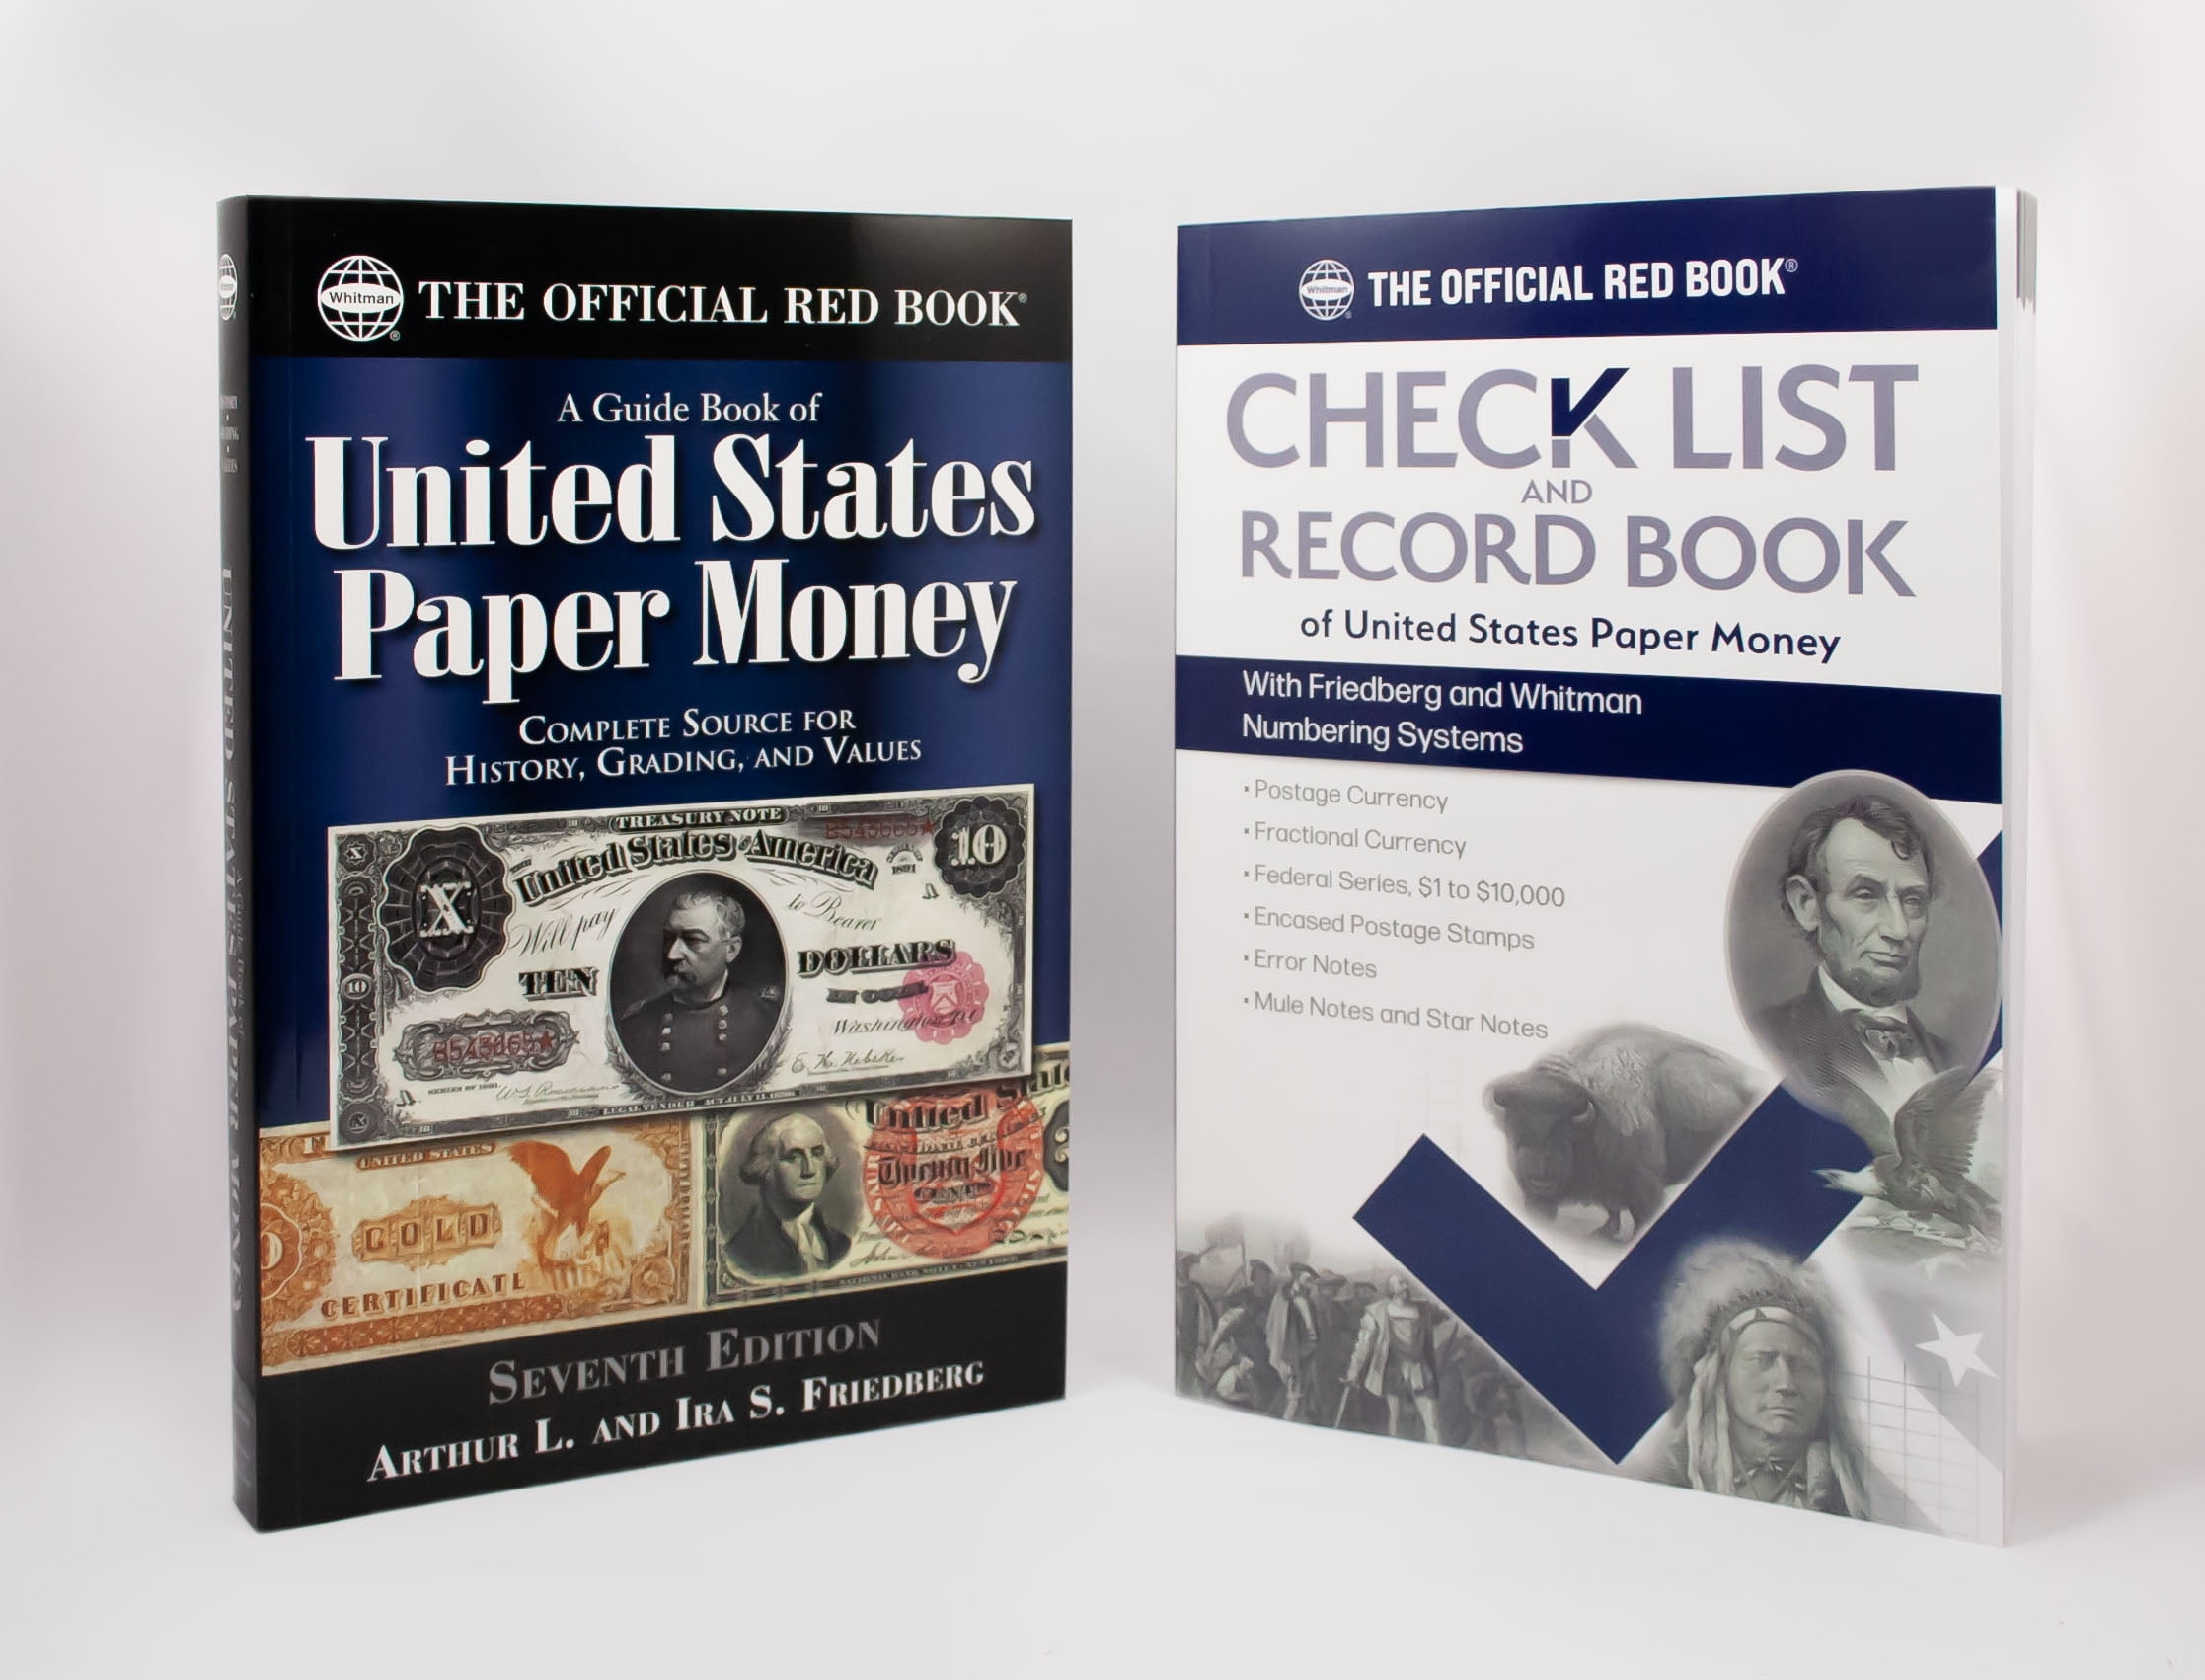 THE OFFICIAL RED BOOK CHECK LIST AND RECORD BOOK OF UNITED STATES PAPER MONEY 